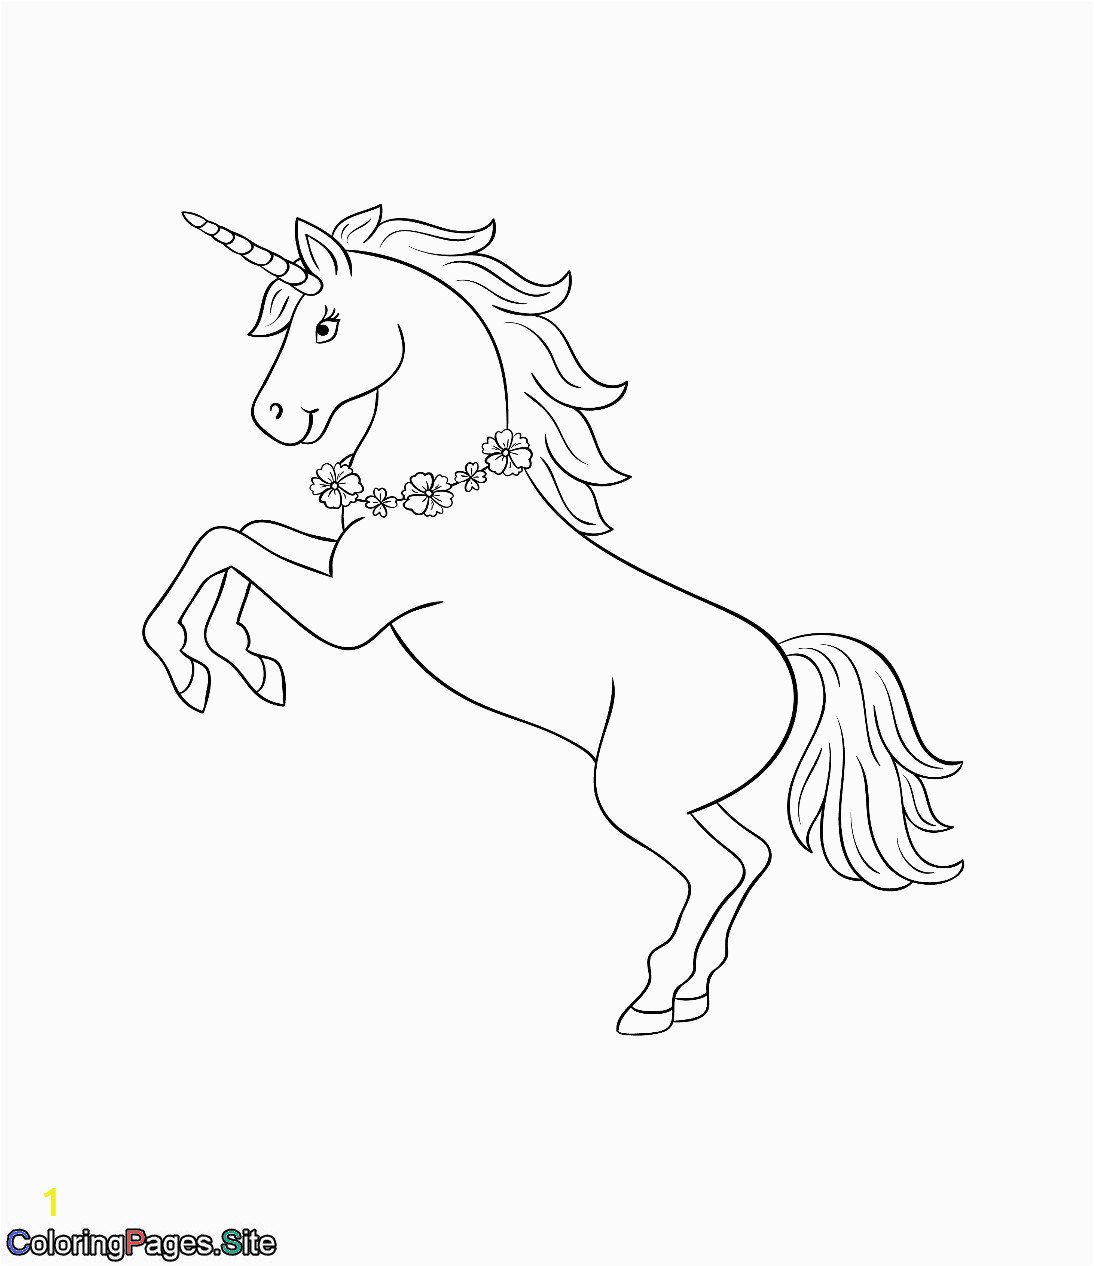 Coloring Pages for Kids Unicorn Unicorn with A Flowers Necklace Coloring Page